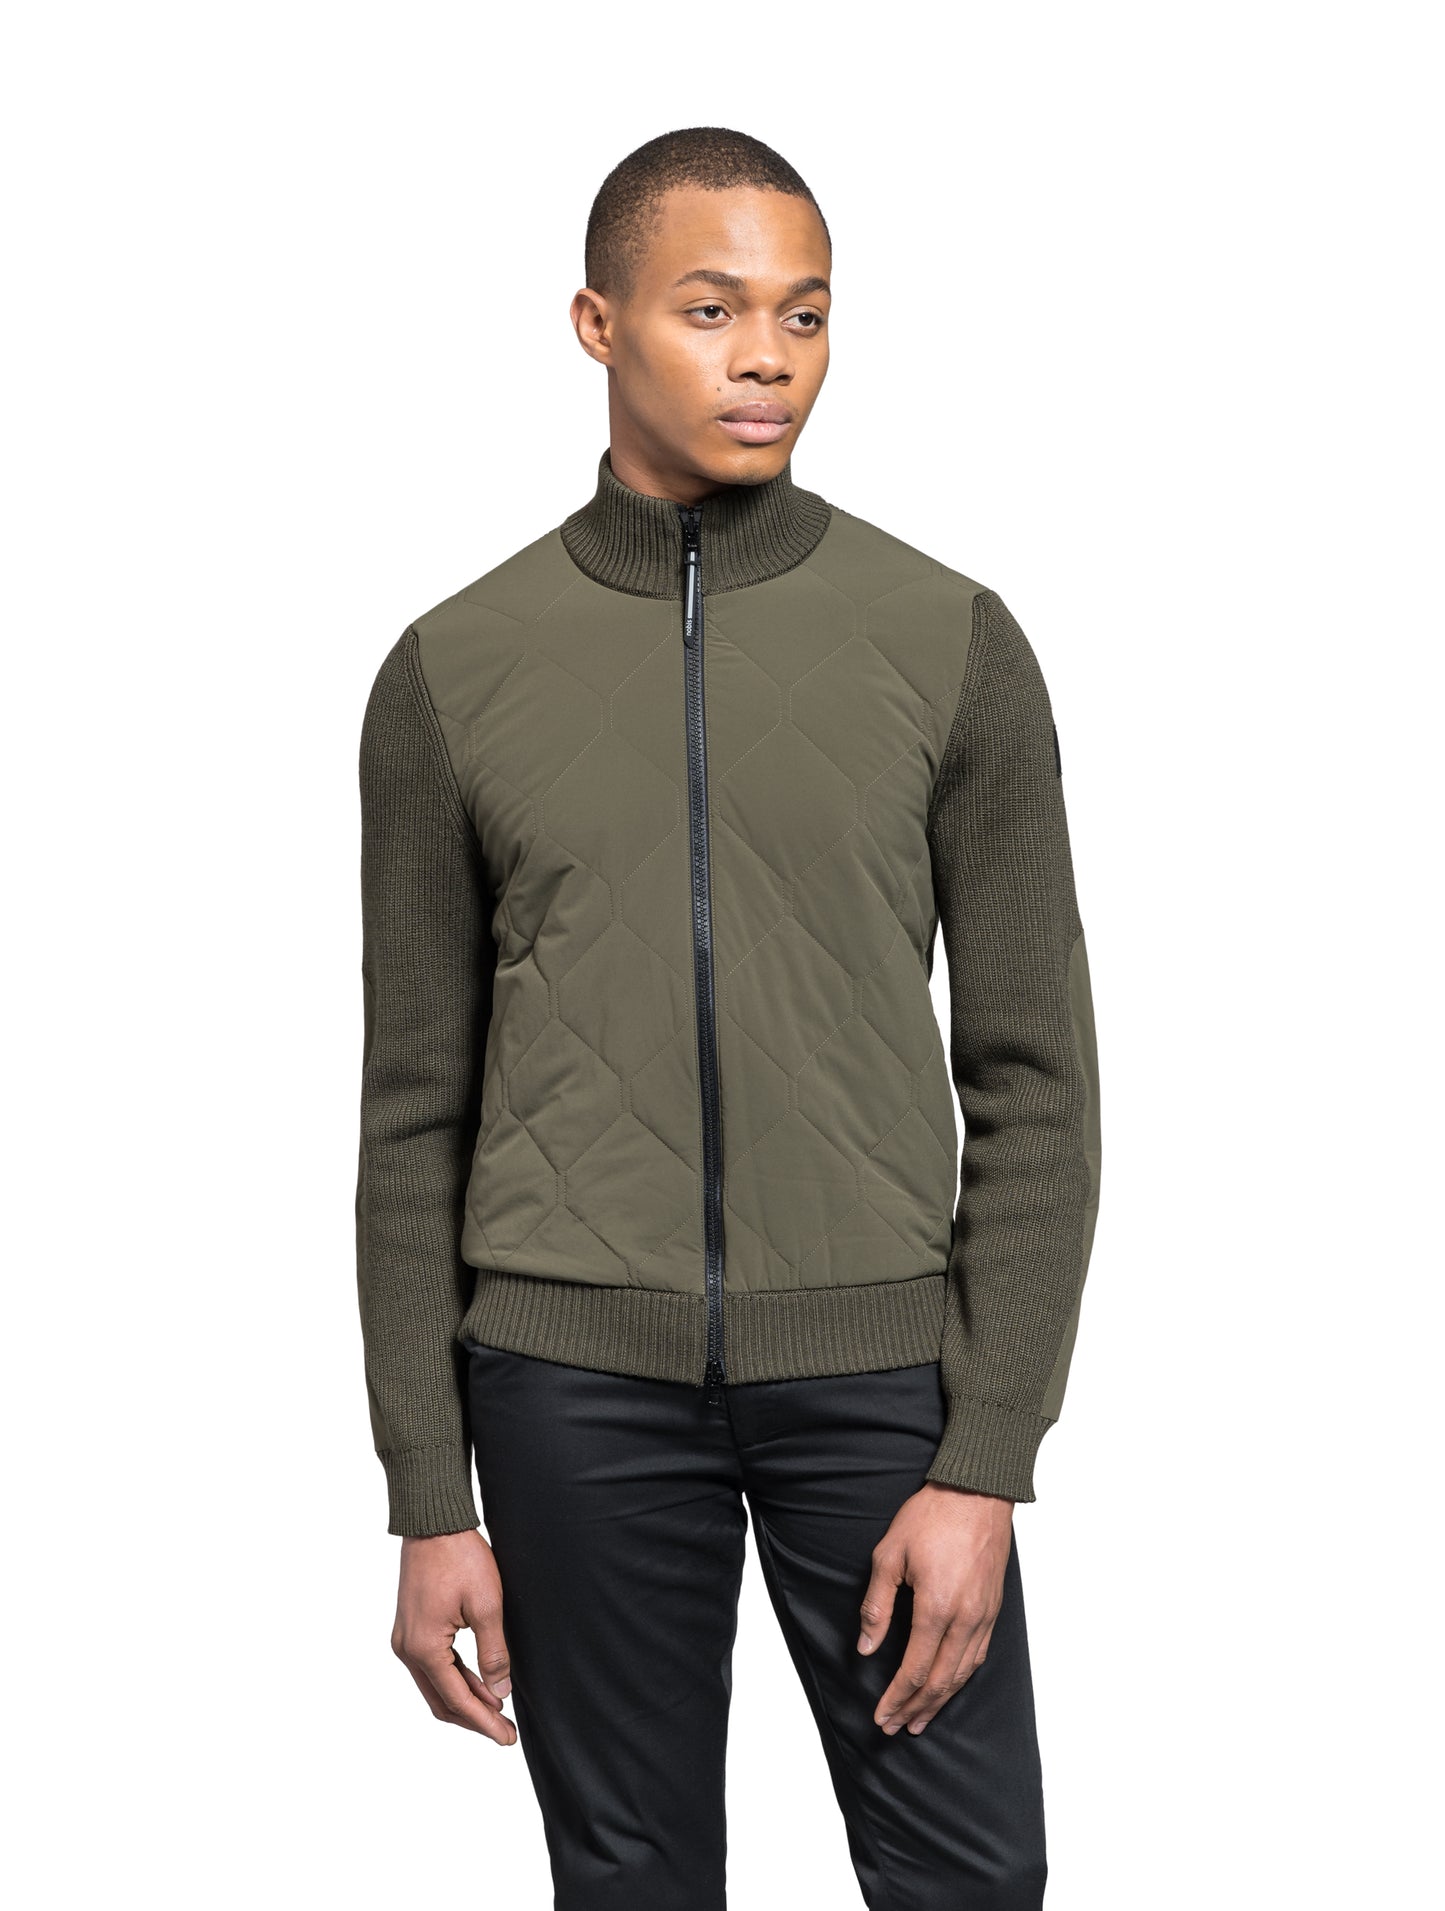 Ero Men's Tailored Hybrid Sweater in hip length, PrimaLoft Gold Insulation Active+, Durable 4-Way Stretch Weave quilted torso, Merino wool knit collar, sleeves, back, and cuffs, two-way front zipper, and hidden waist pockets, in Fatigue